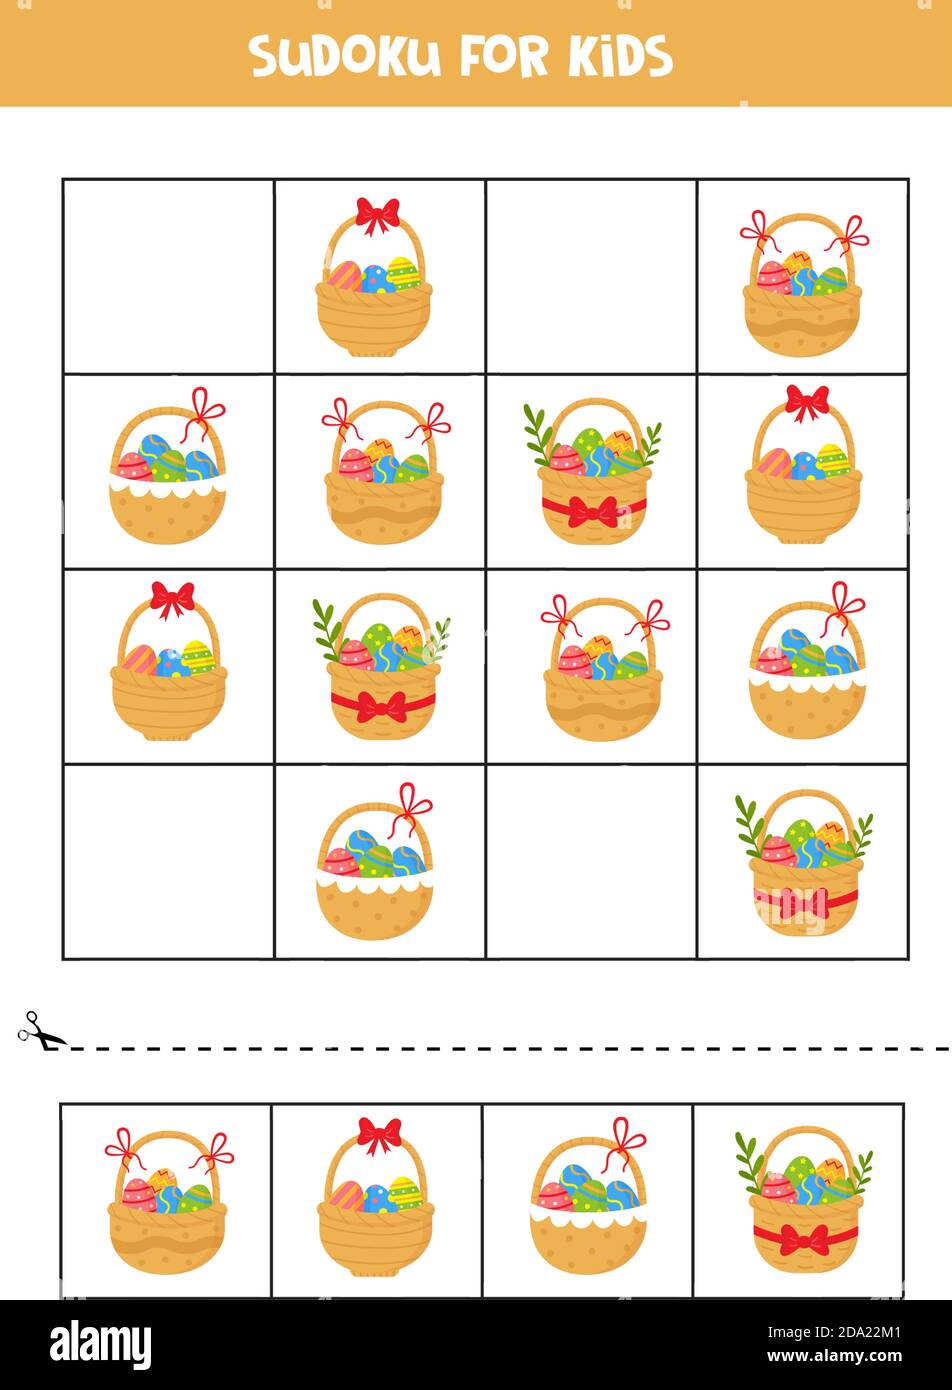 Sudoku game. Set of Easter baskets with eggs. Stock Vector